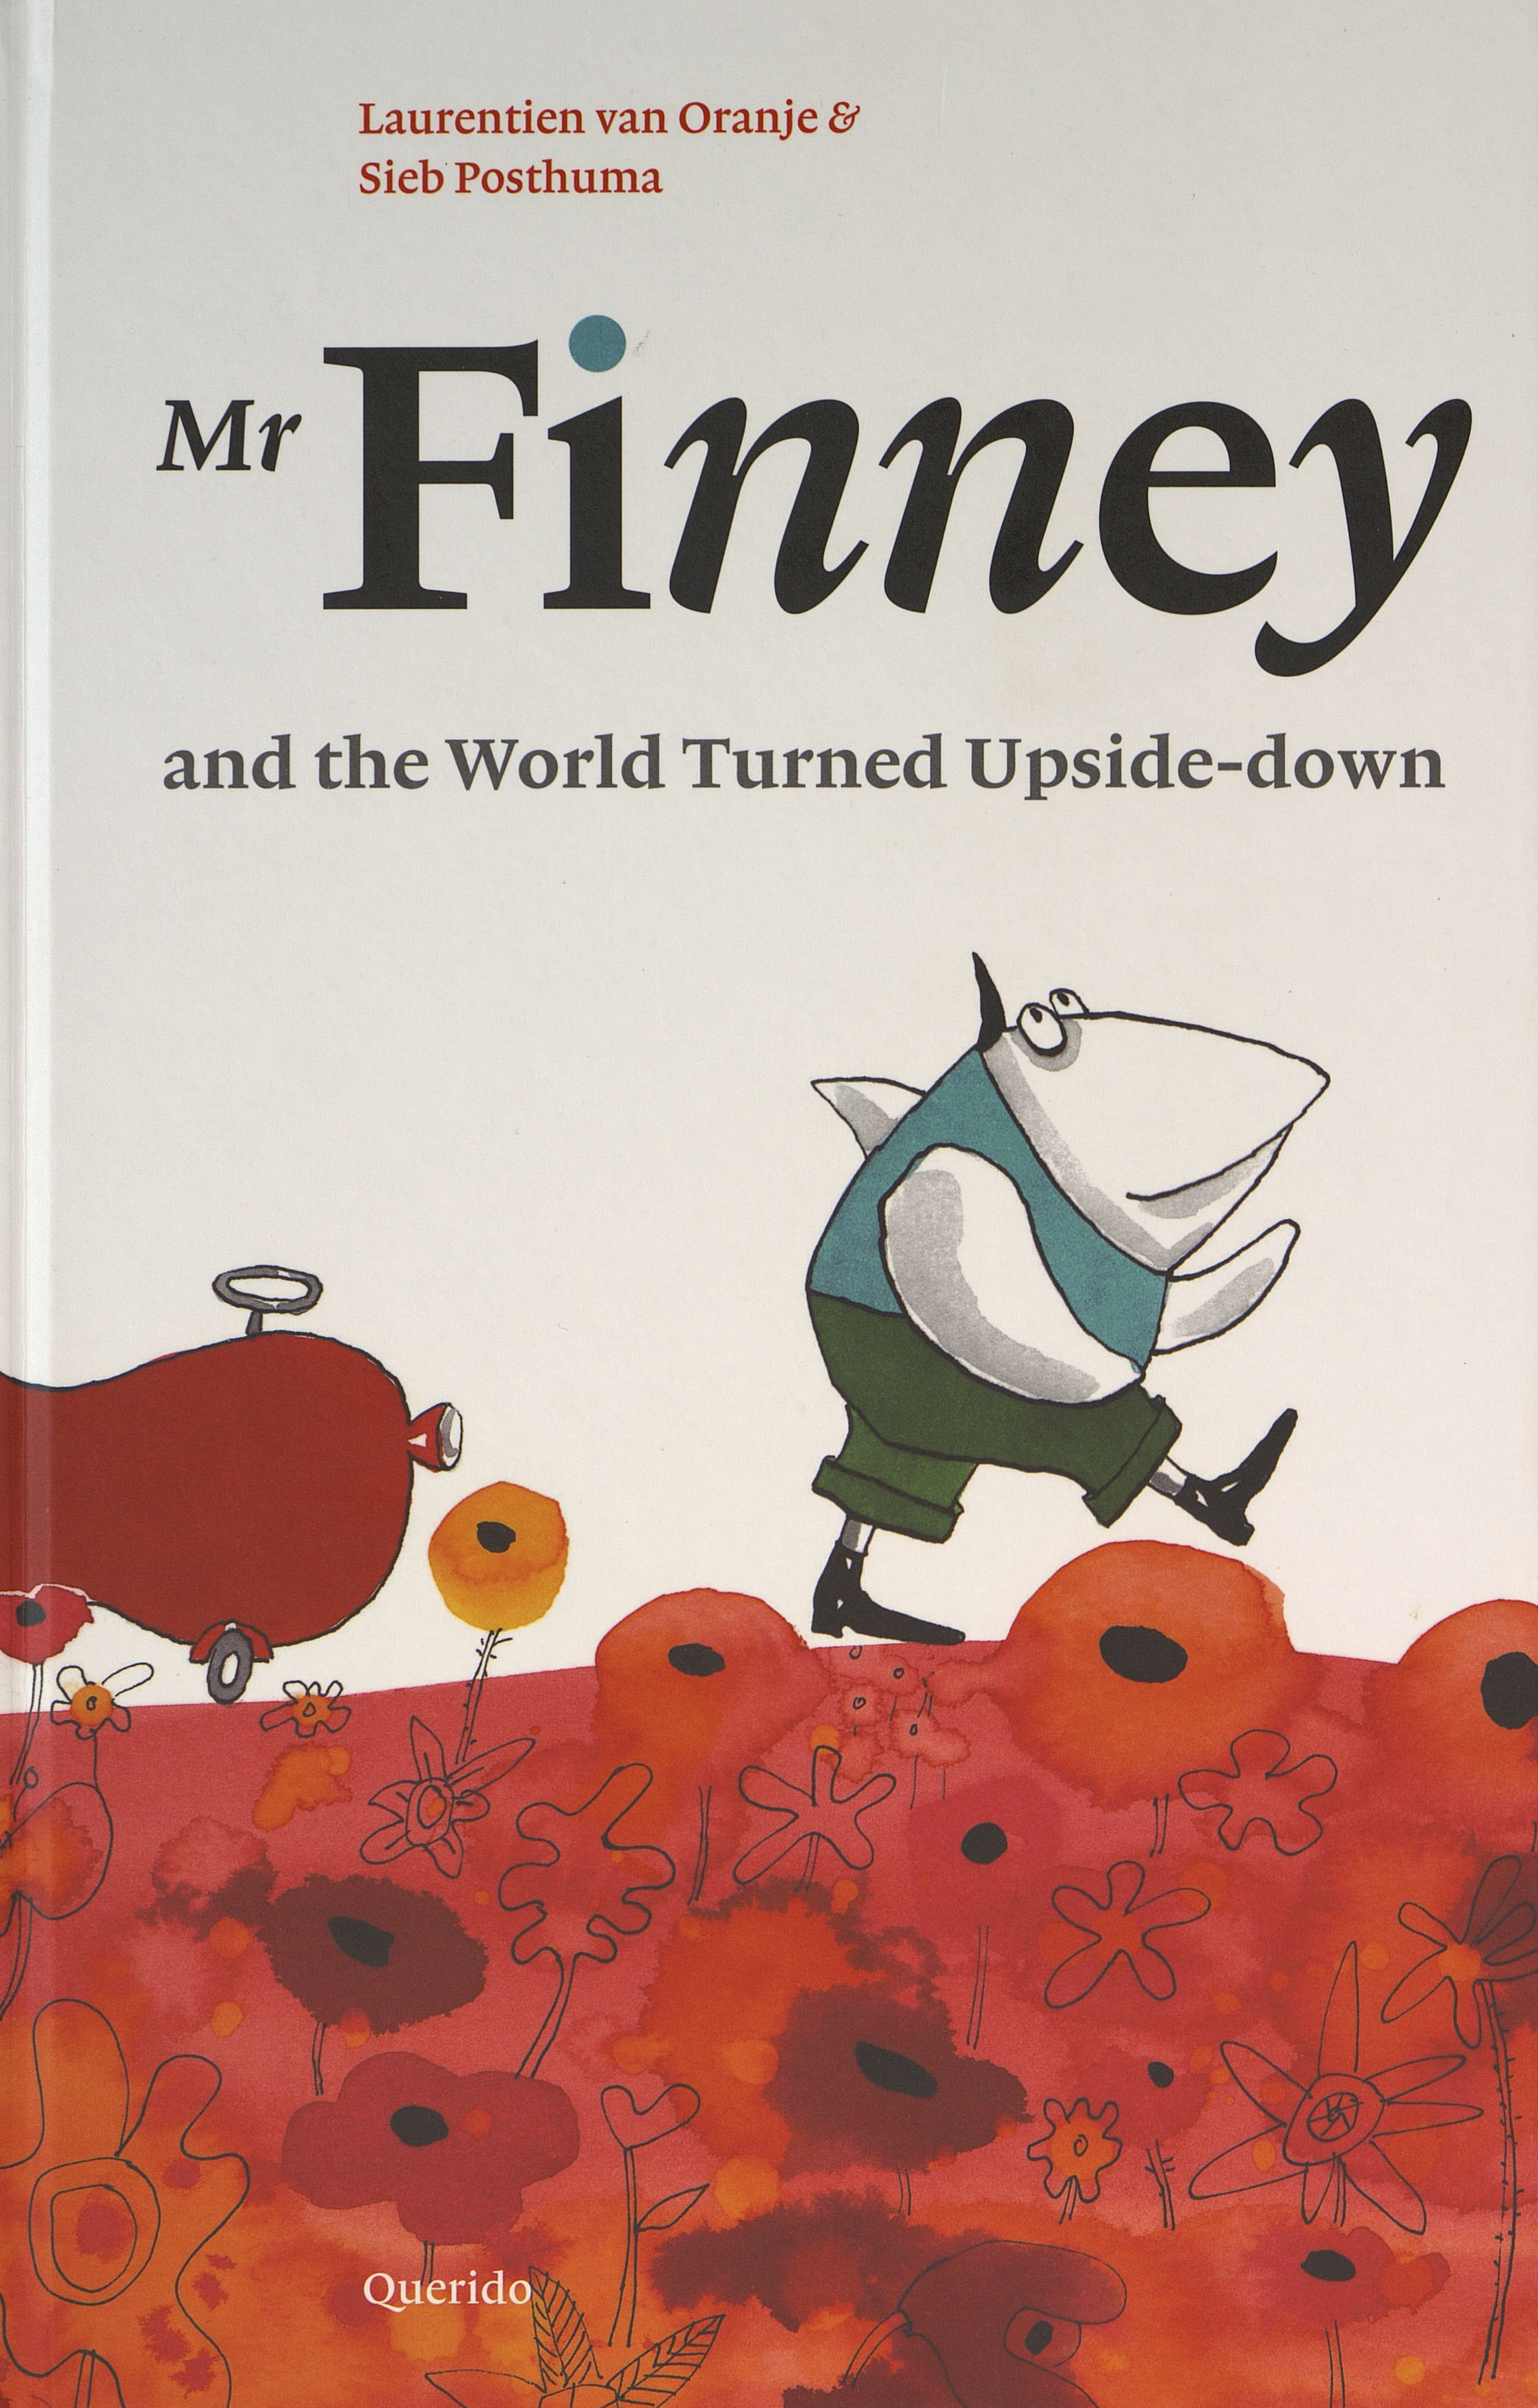 Mr Finney and the World Turned Upside-down